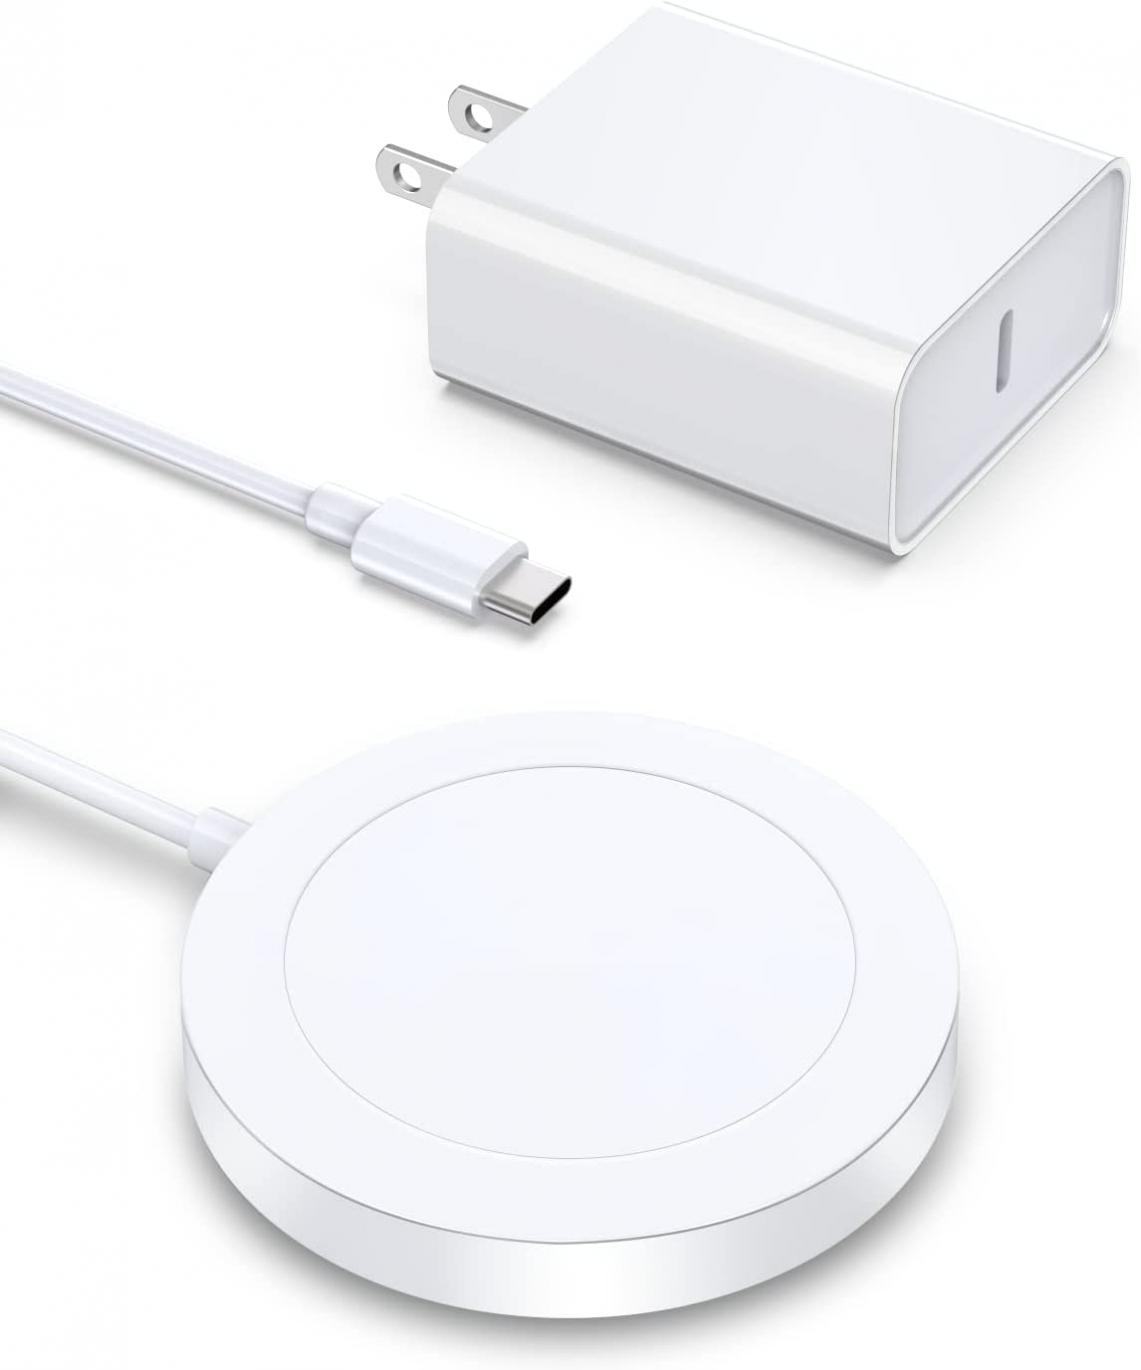 Magnetic Wireless Charger - Magnet Charging Pad Compatible with iPhone 14/14 pro/14 plus/14 pro max/ 13 pro max/12 pro max - Mag-Safe Charger for AirPods 3 2 Pro with USB-C 20W PD Adapter